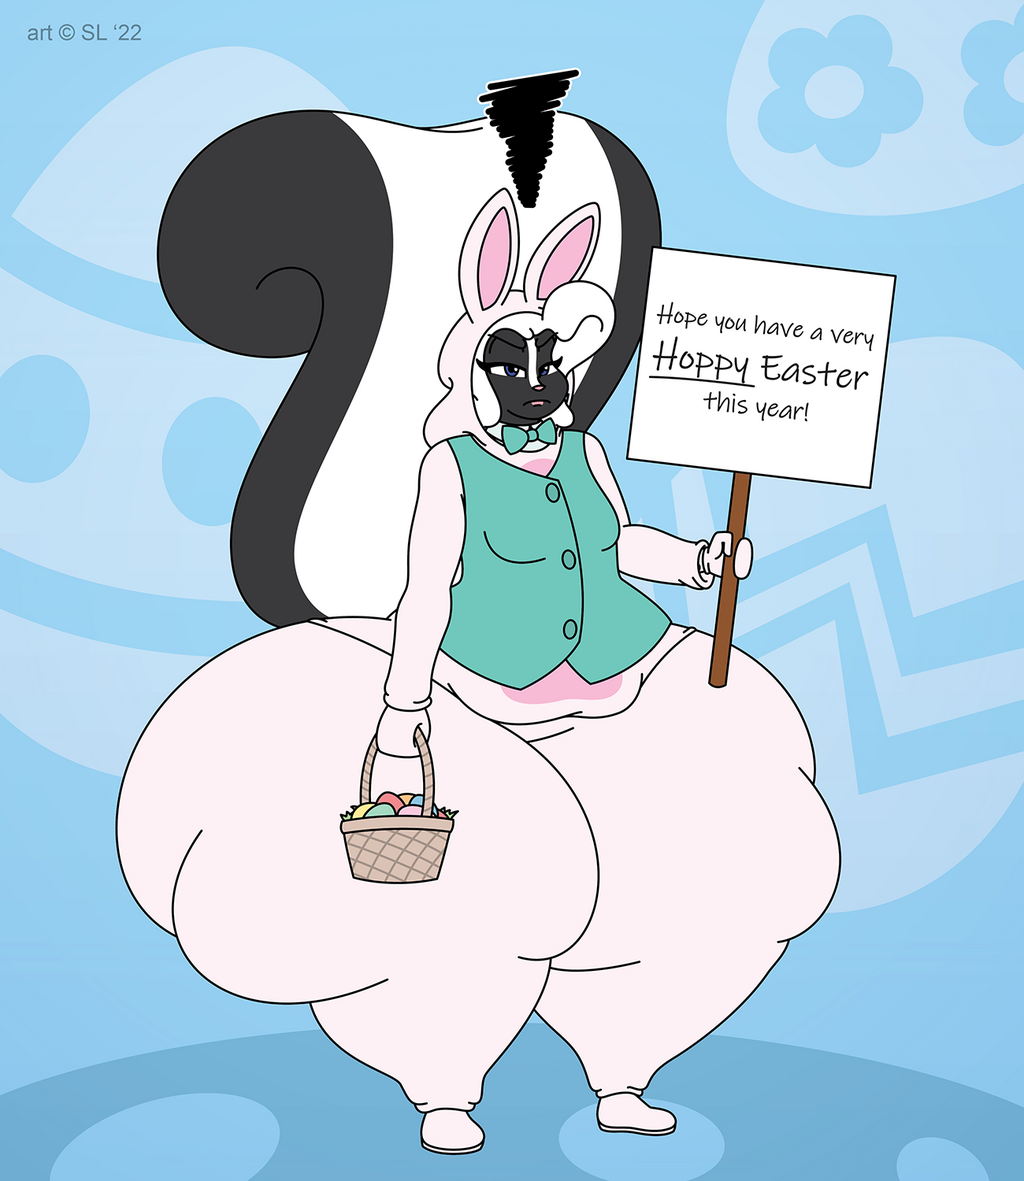 Most recent image: Chelsea's Easter Suit